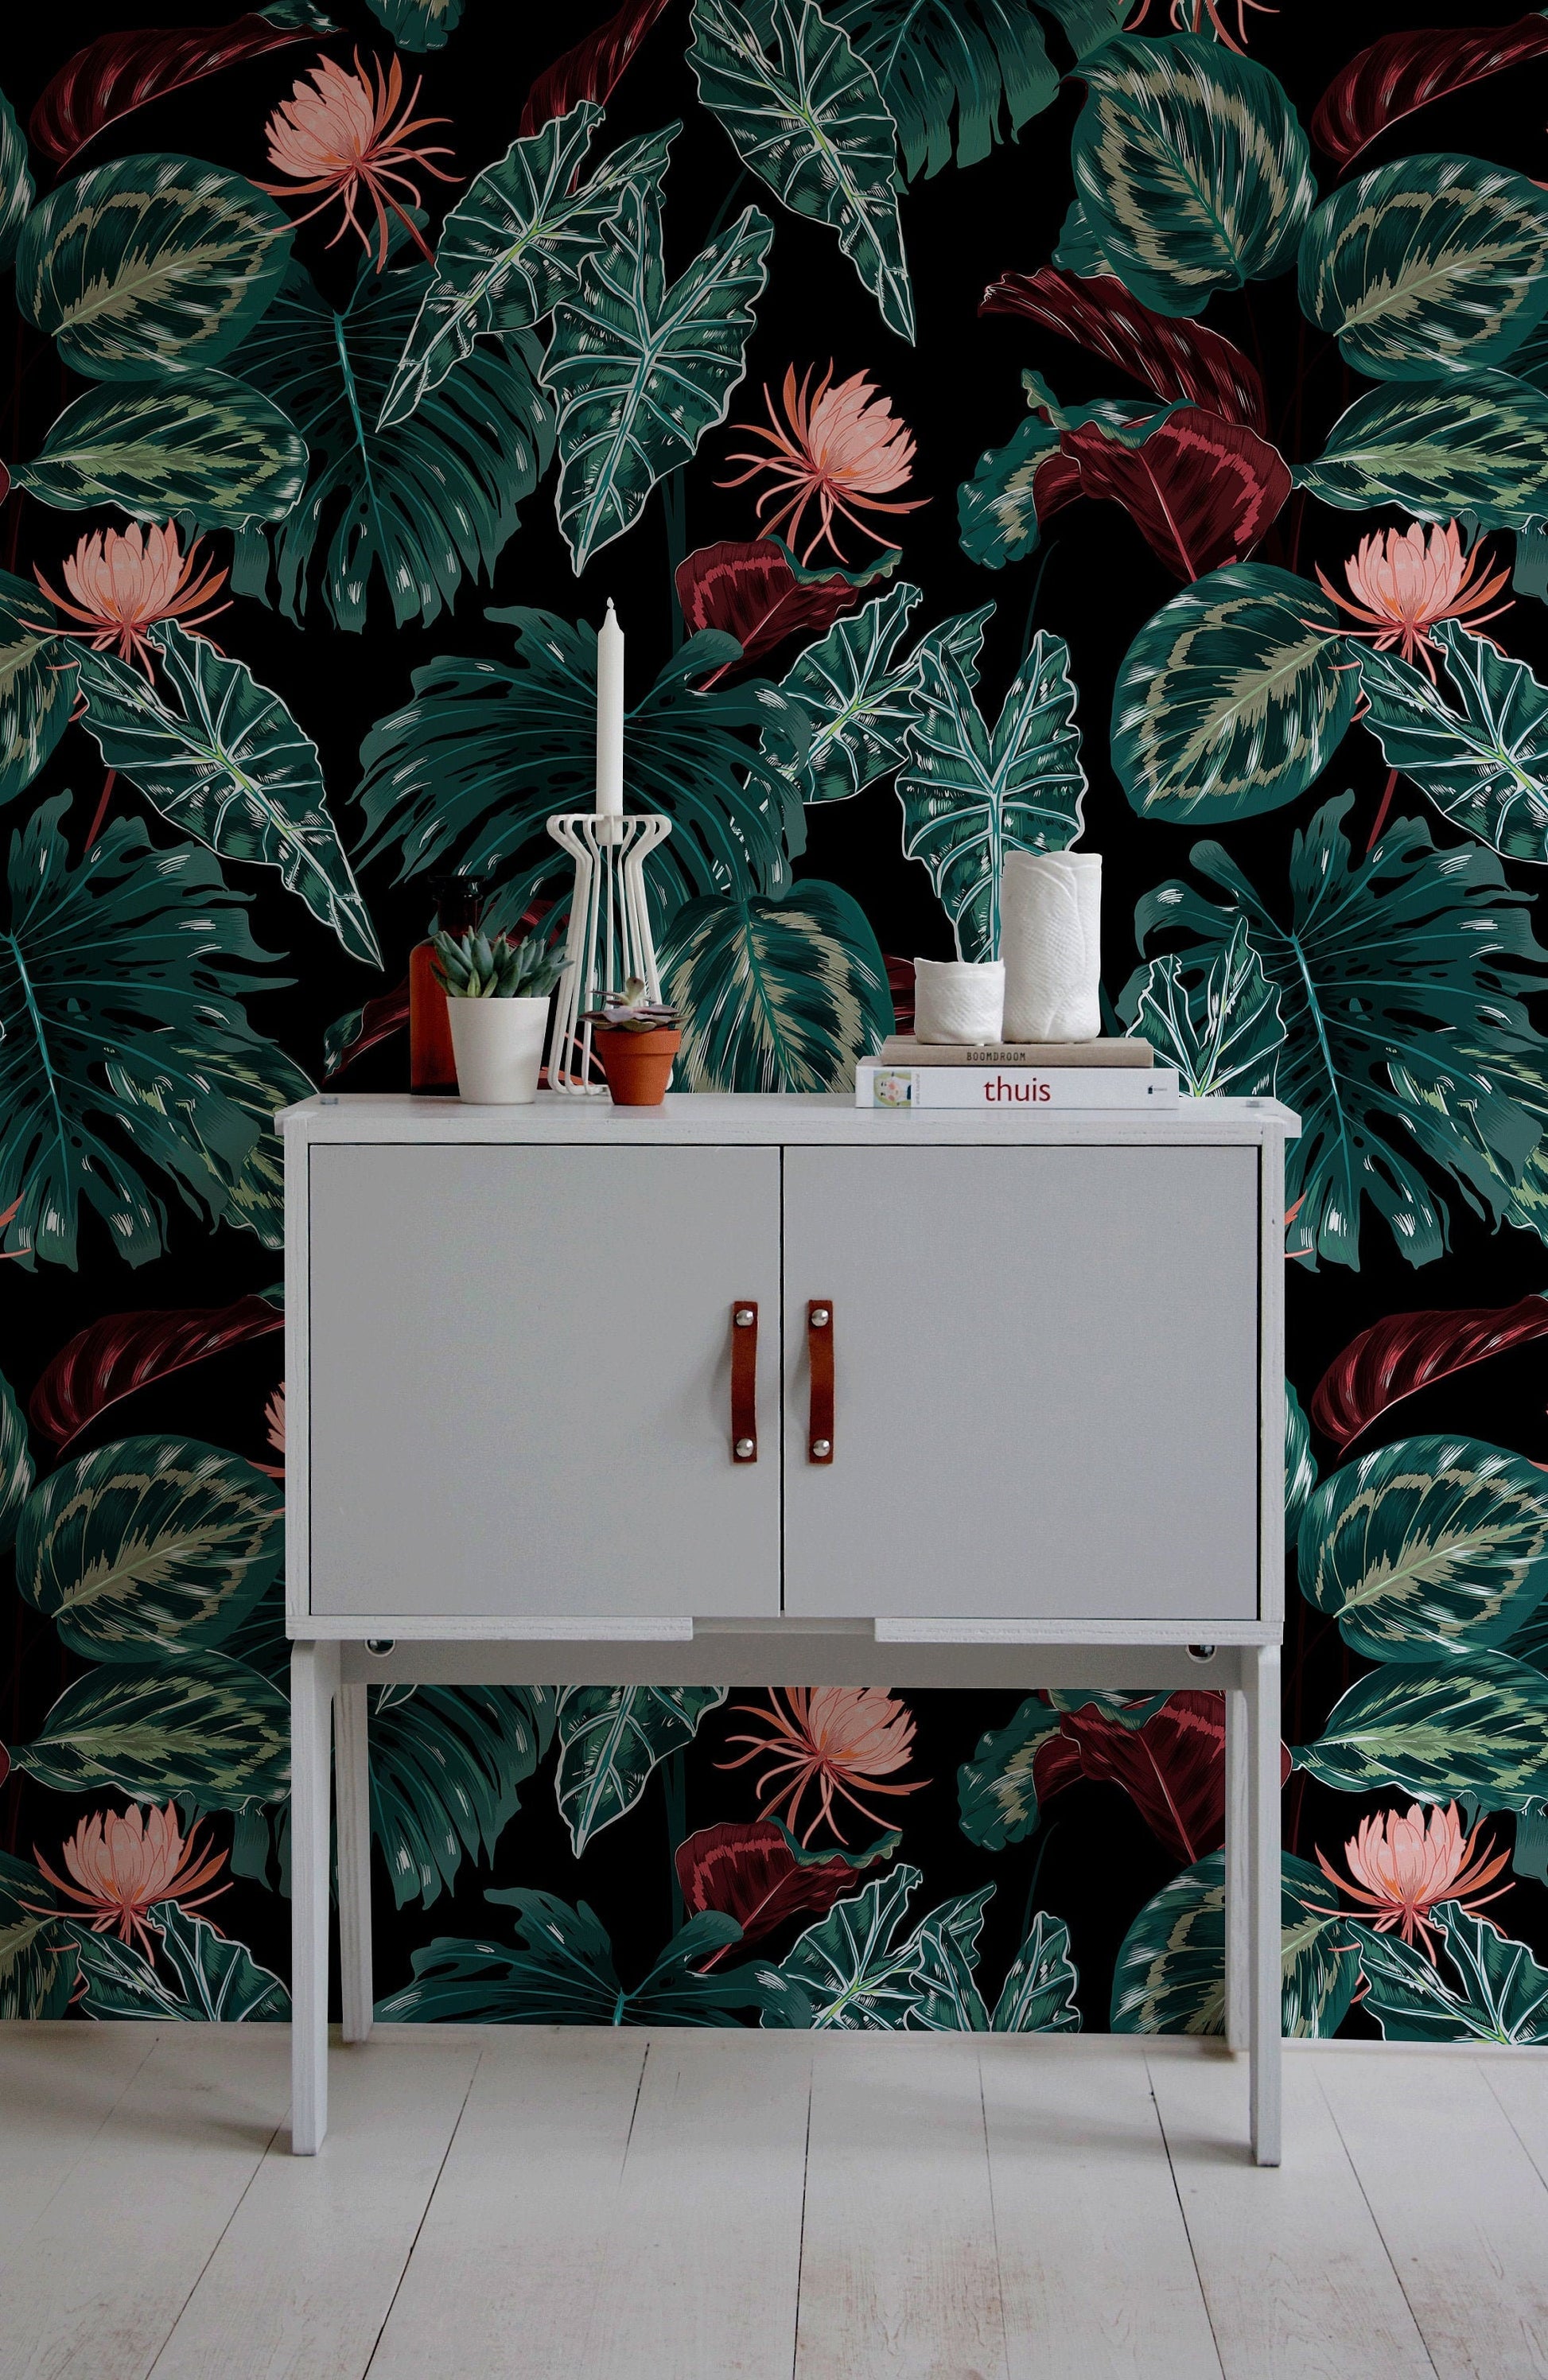 Wallpaper Peel and Stick Wallpaper Removable Wallpaper Home Decor Wall Art Wall Decor Room Decor / Tropical Leaves Wallpaper - B071